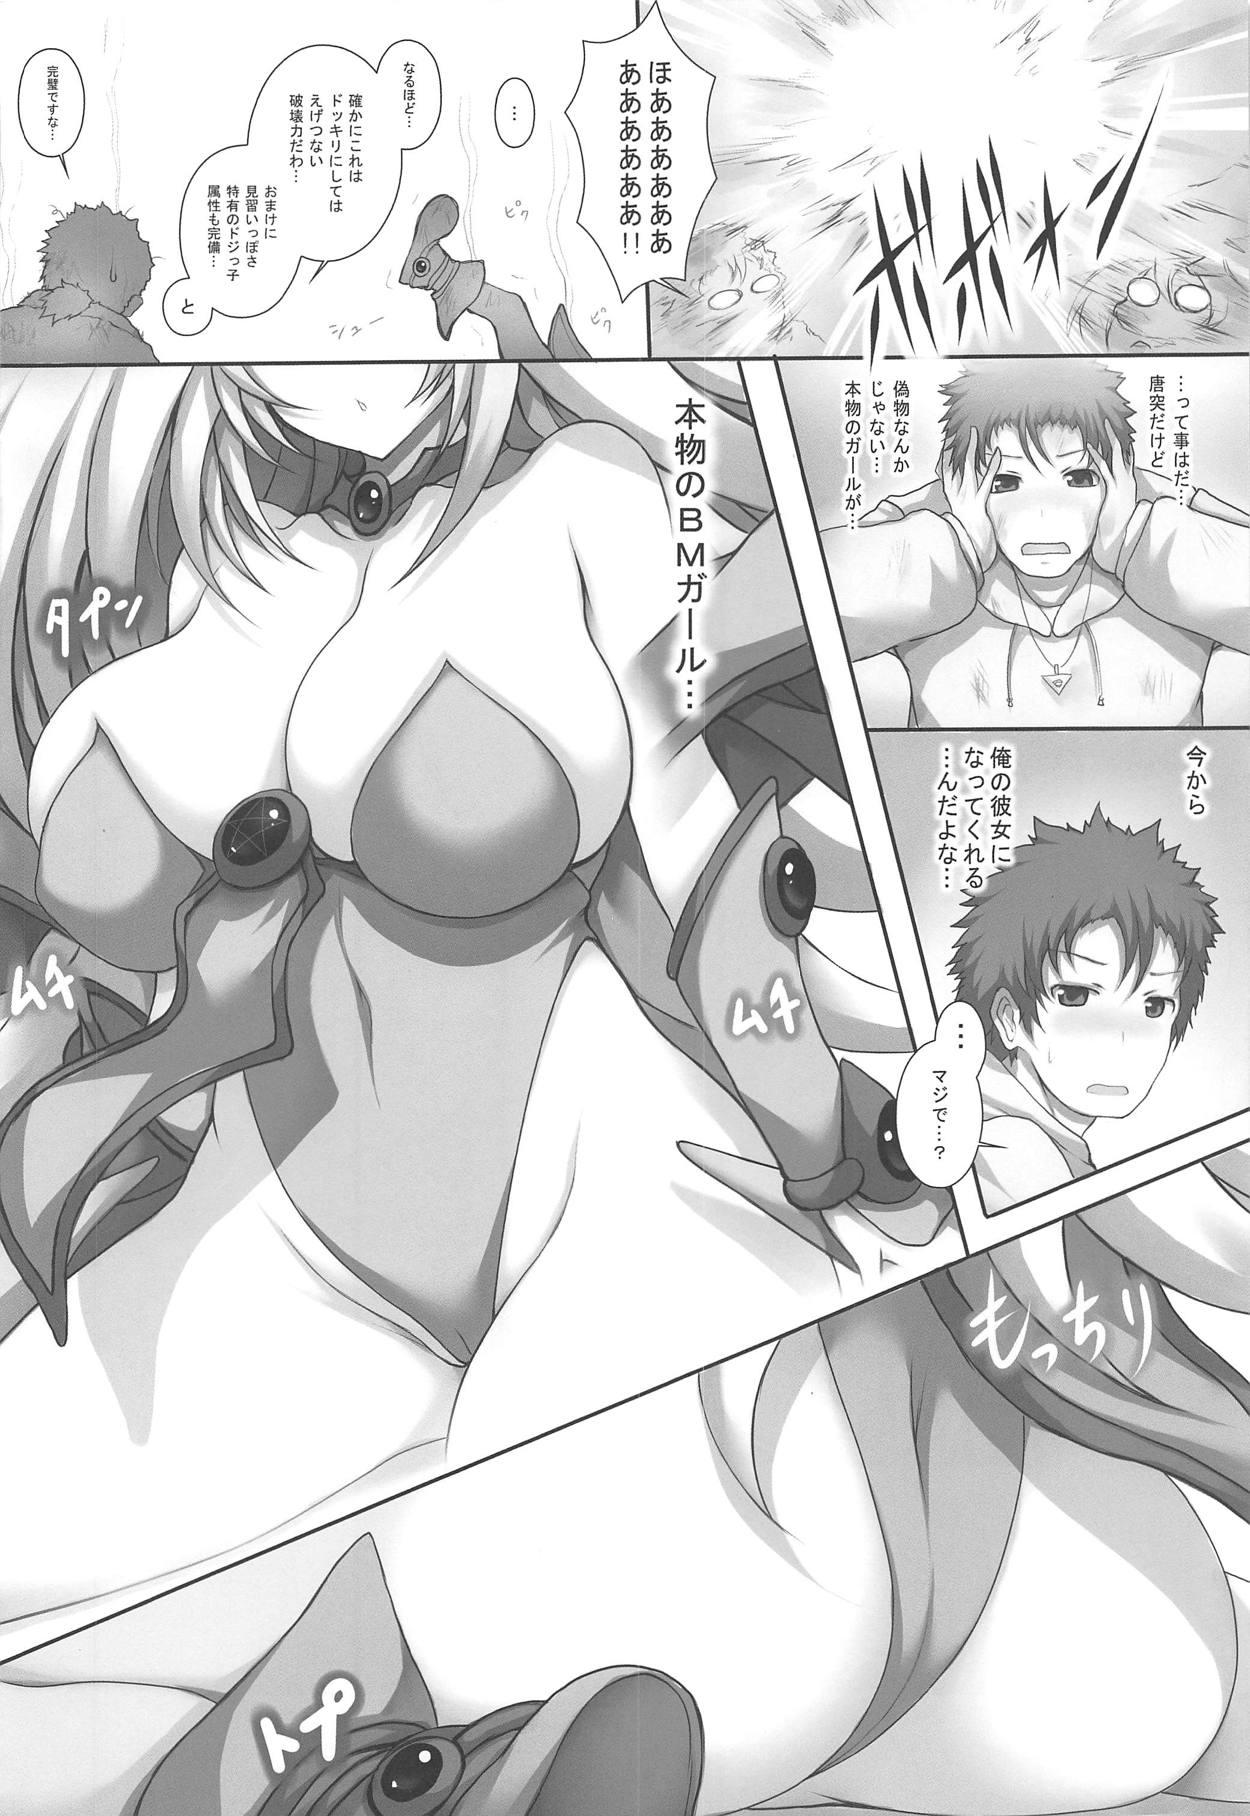 Hotporn Girl to Issho - Yu gi oh Vip - Page 7